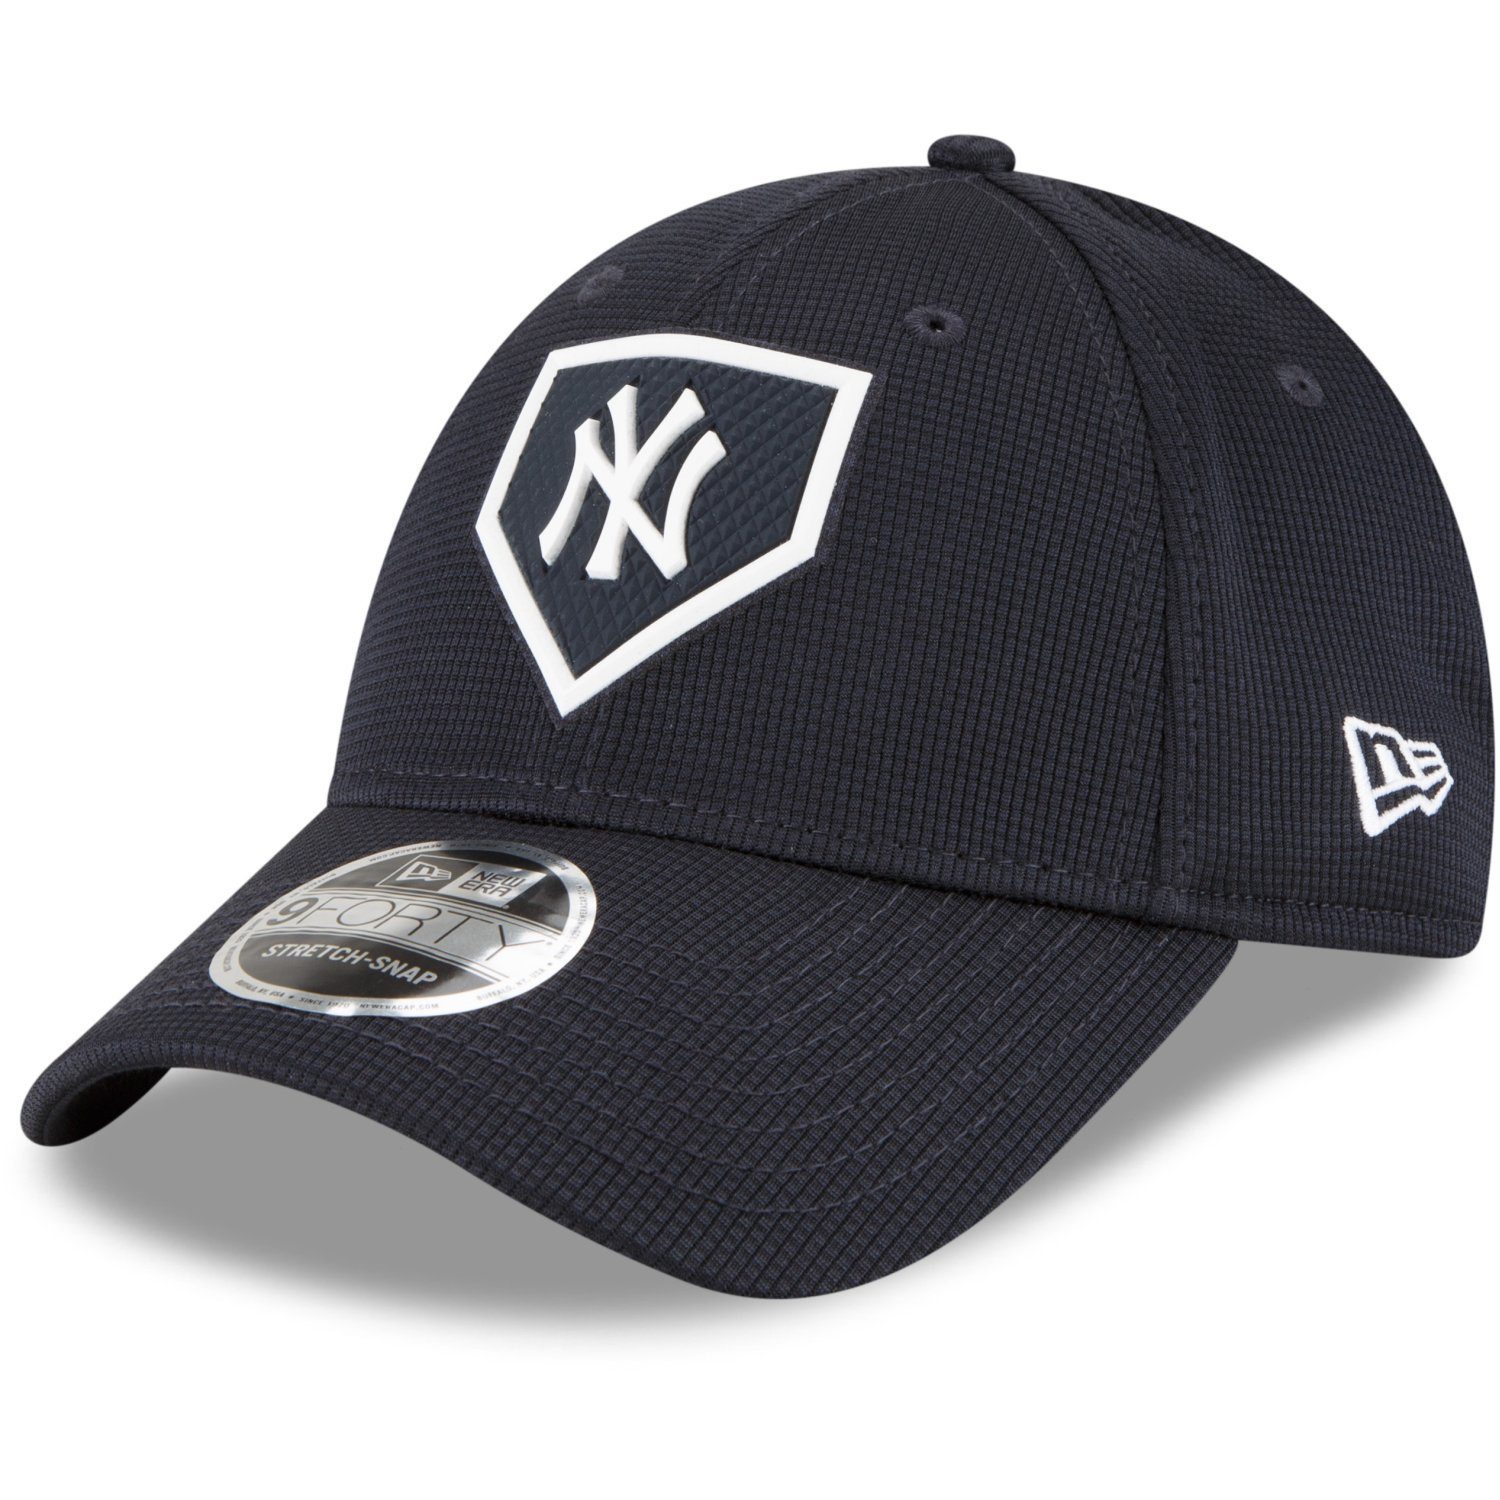 Cap StretchFit Era Fitted New CLUBHOUSE New 2022 Yankees MLB 9FORTY York